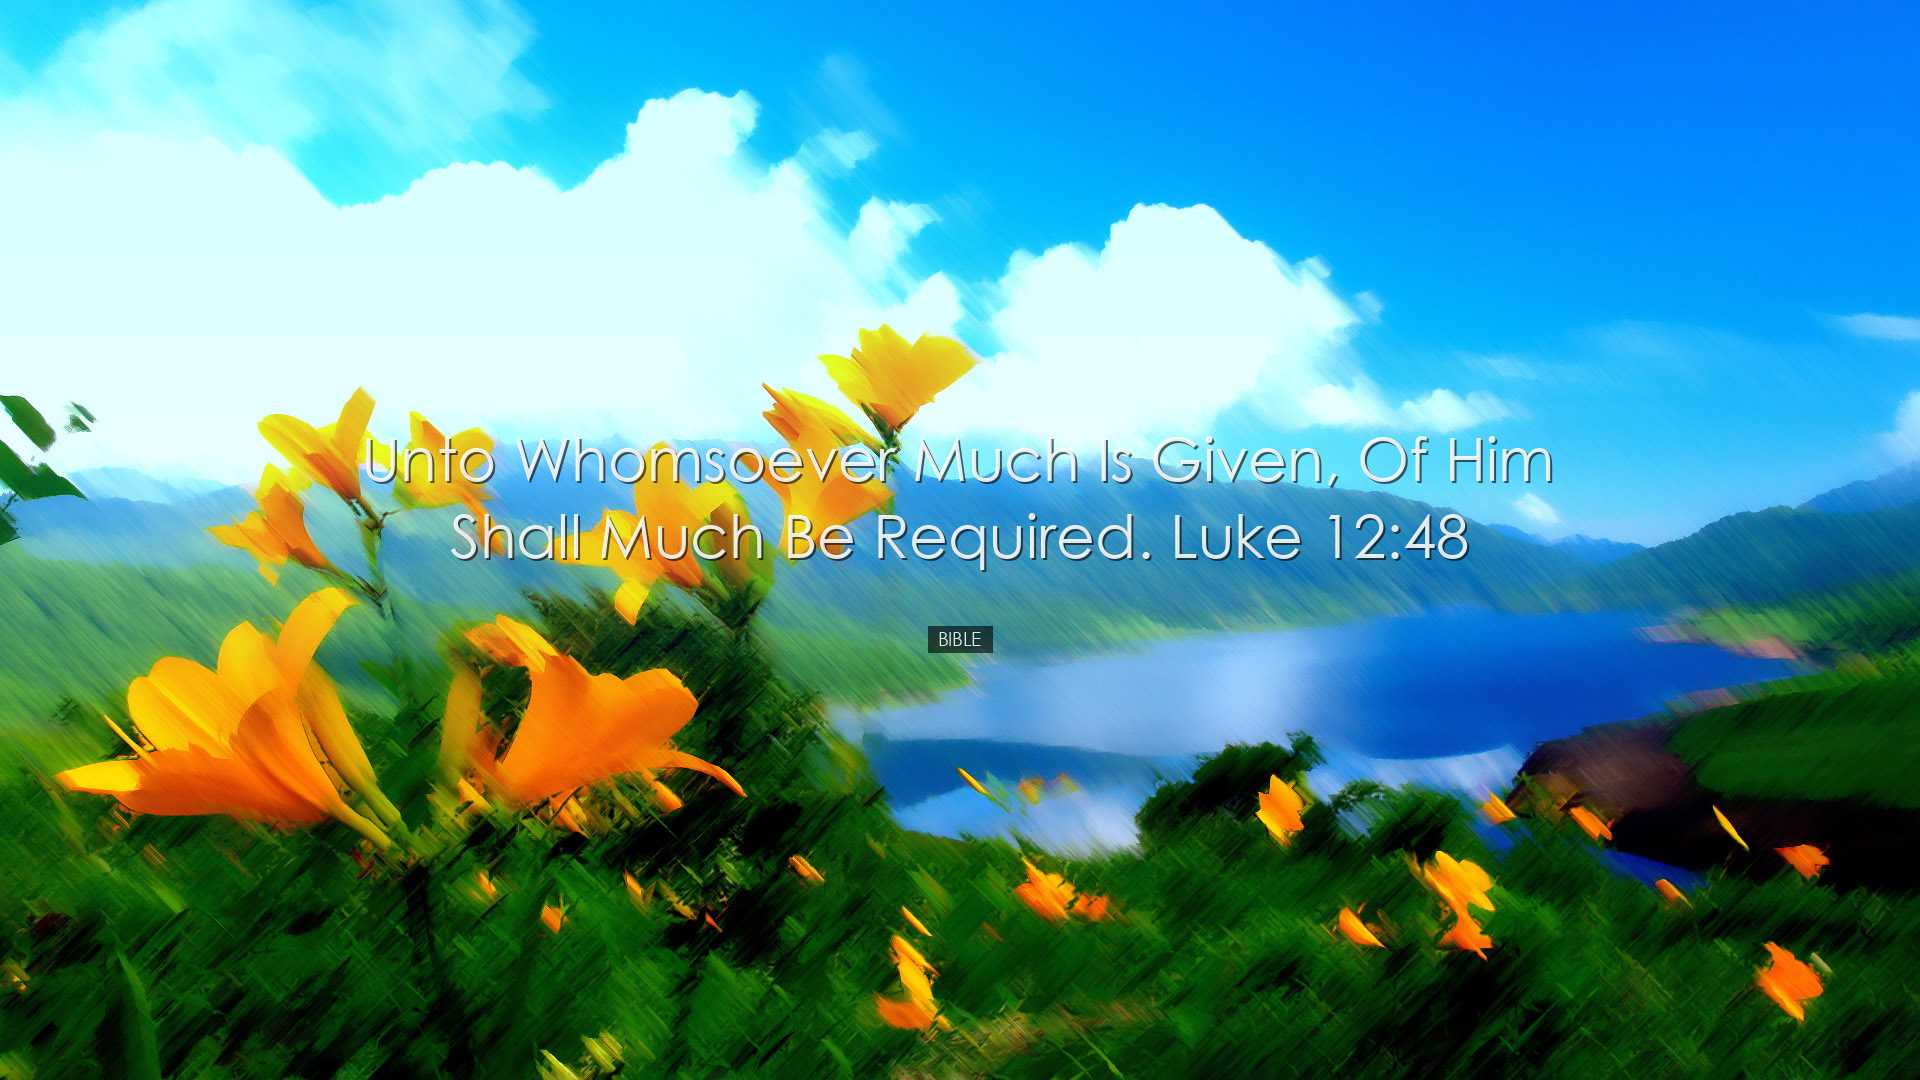 Unto whomsoever much is given, of him shall much be required. Luke